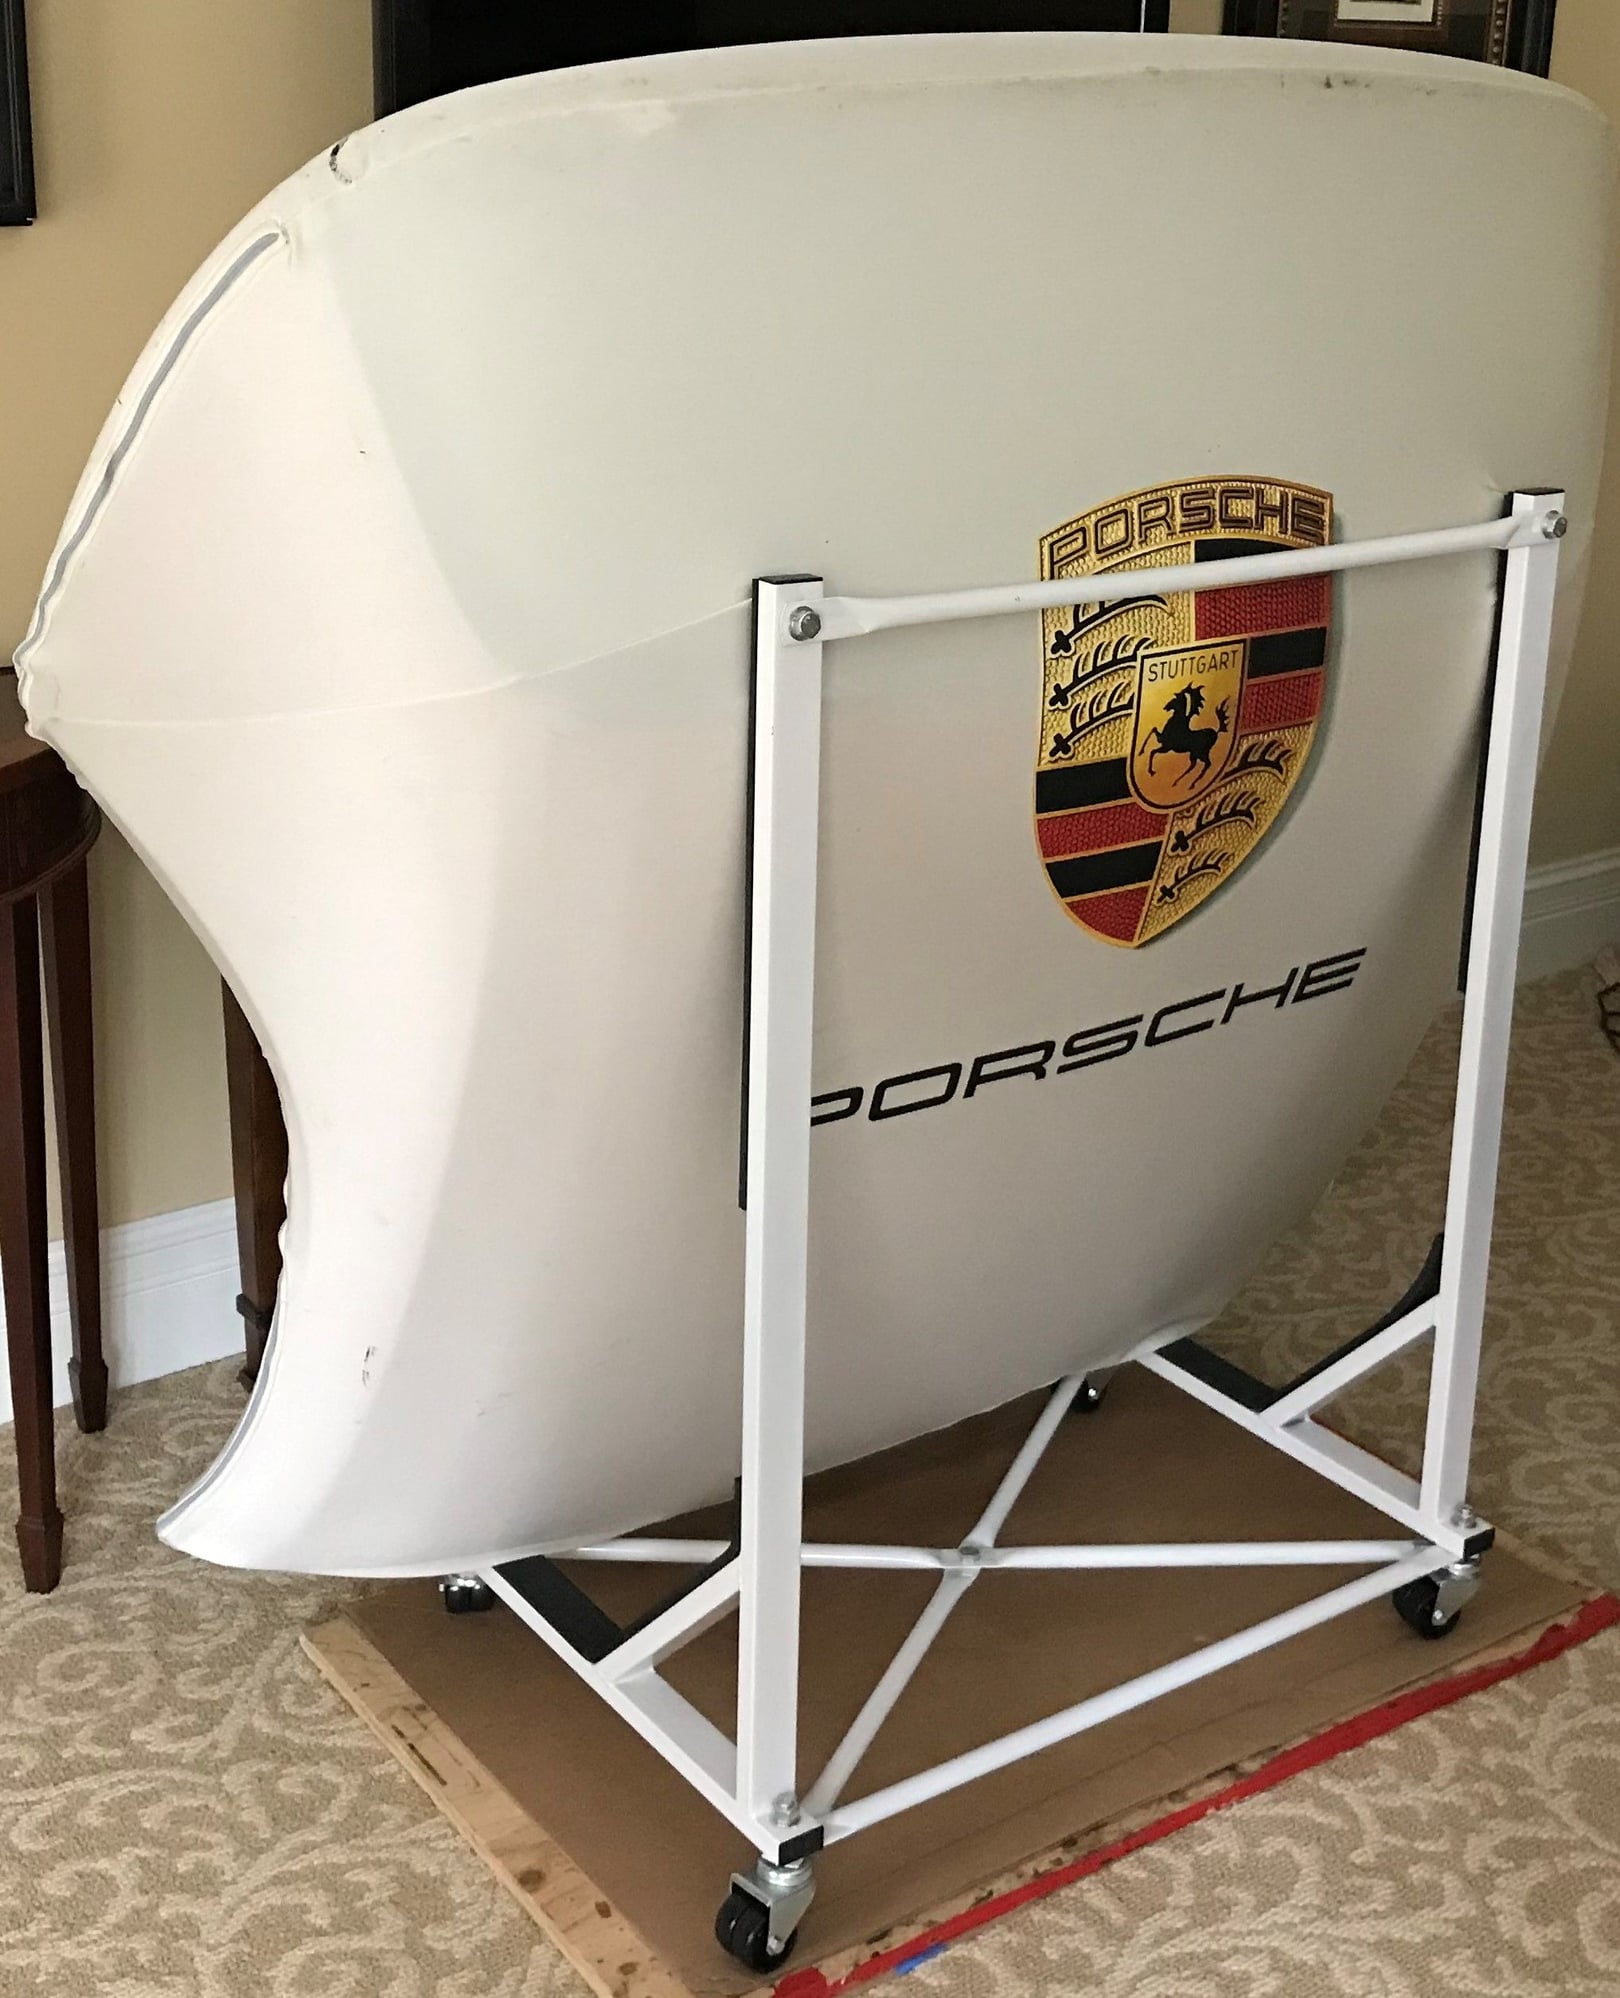 Exterior Body Parts - Porsche 986 Boxster Hardtop, Cart, Cover - Used - 1996 to 2004 Porsche Boxster - Keene, NH 03431, United States